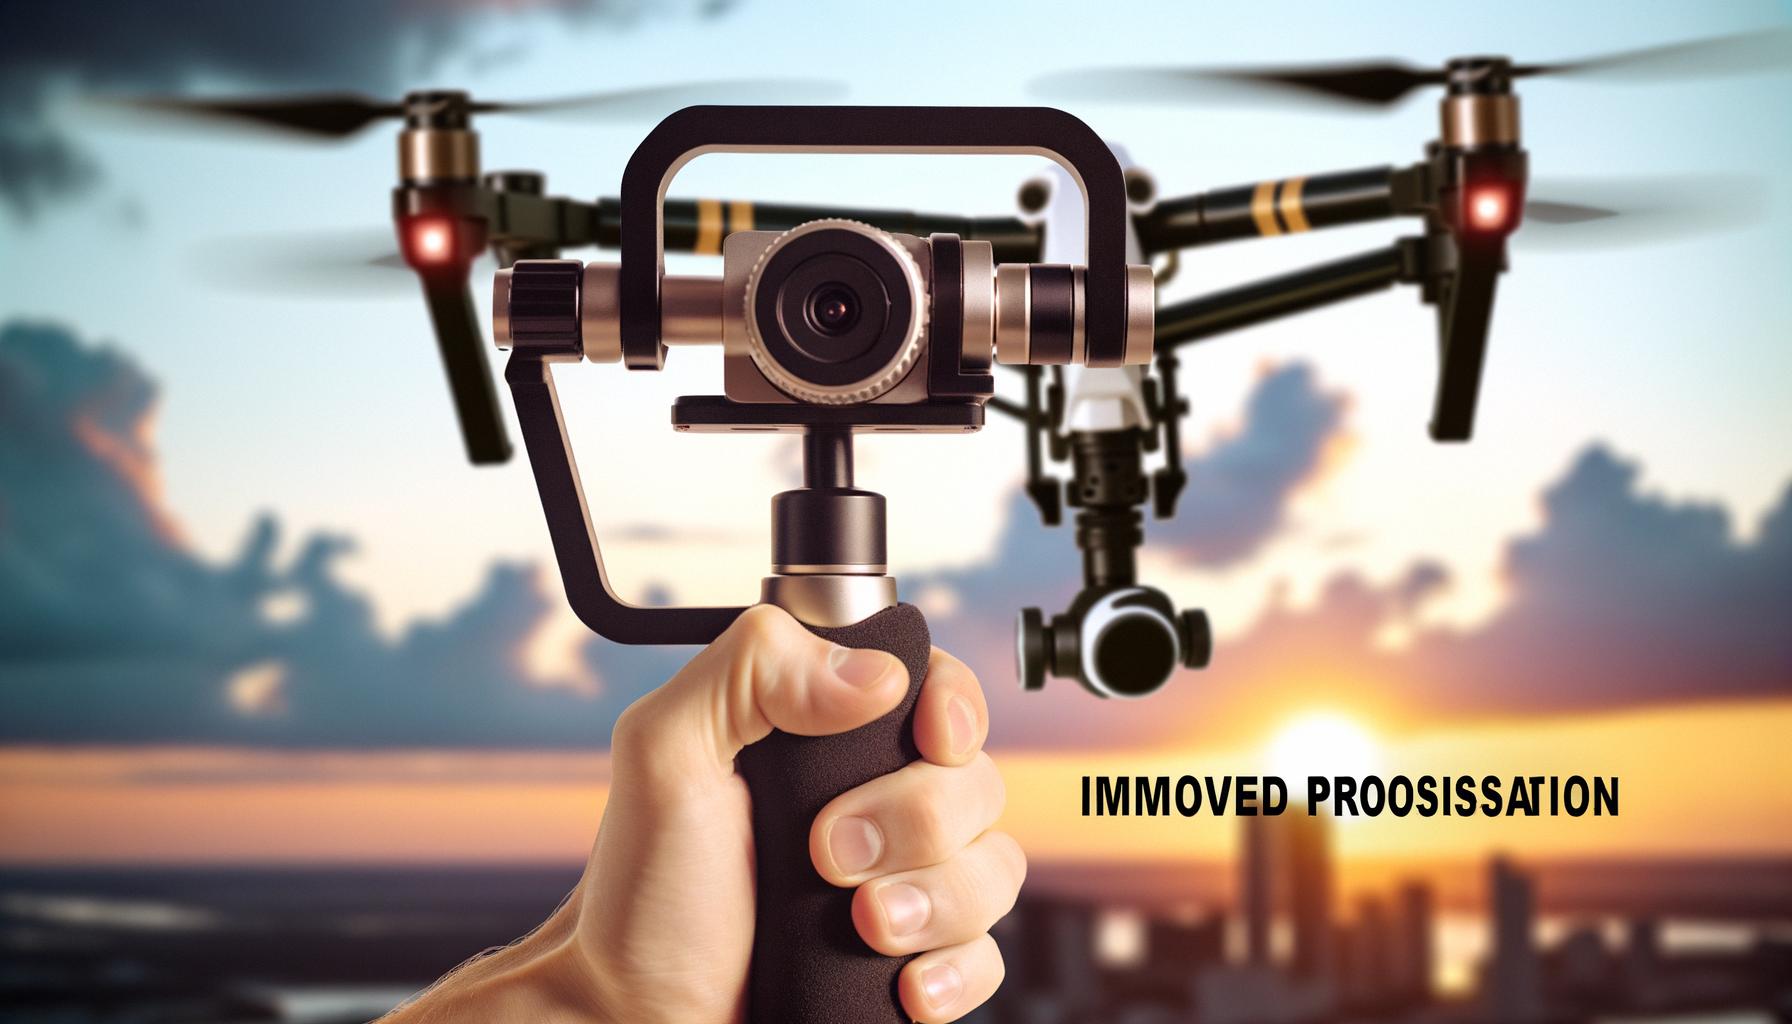 DJI unveils the RS 4 and RS 4 Pro gimbals, enhancing shooting stability,.